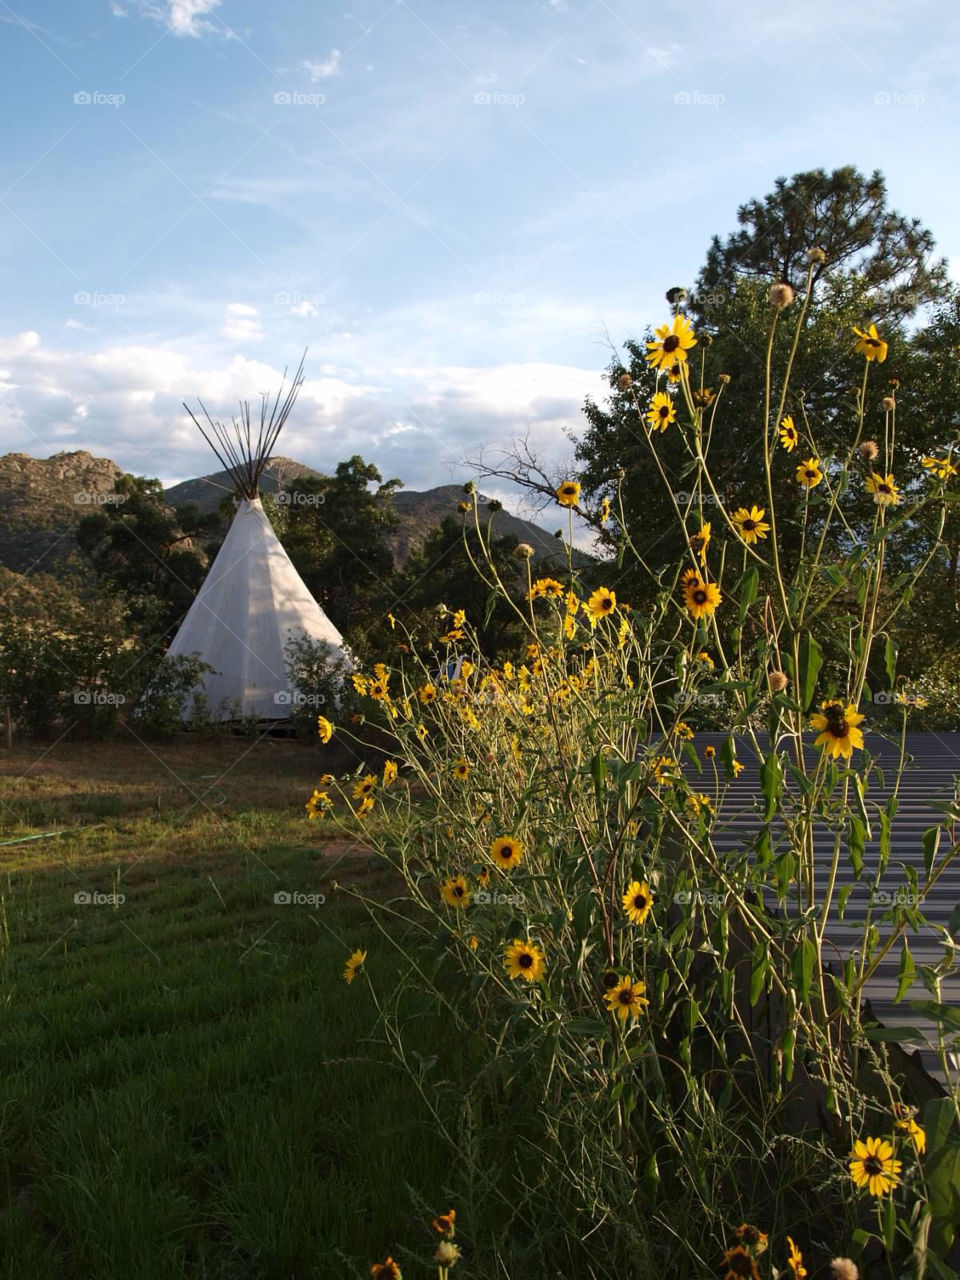 river sunflower colorado teepee by ezdrossi